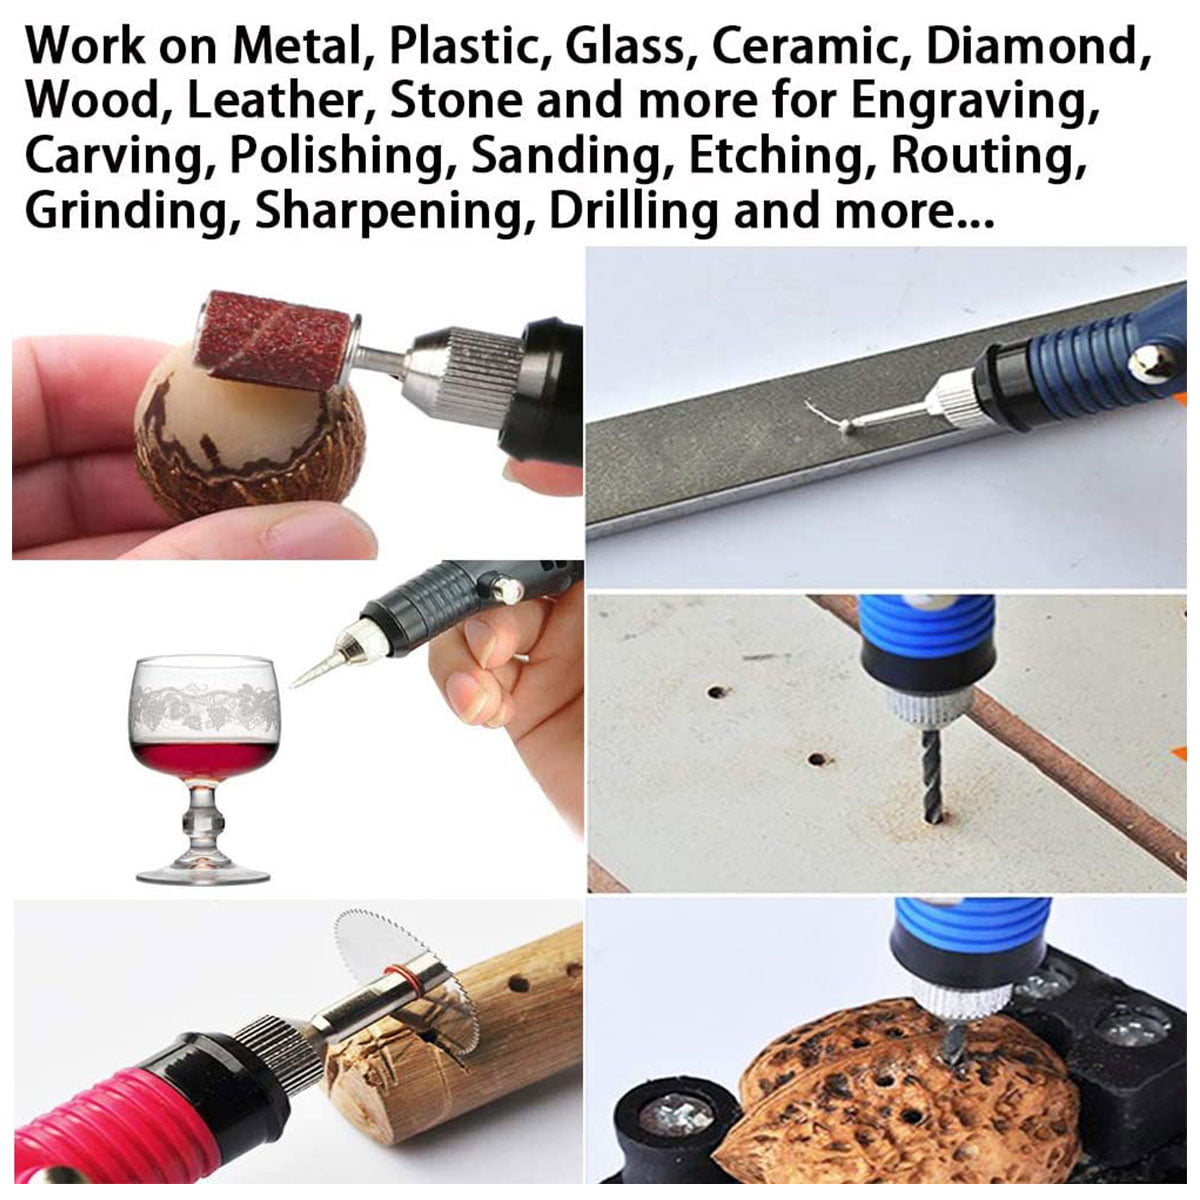 NEW Dremel 3000 Workstand Tool and Bit Holder crafting, Model Making, Glass  Etching, Polishing, Woodworking, and More 